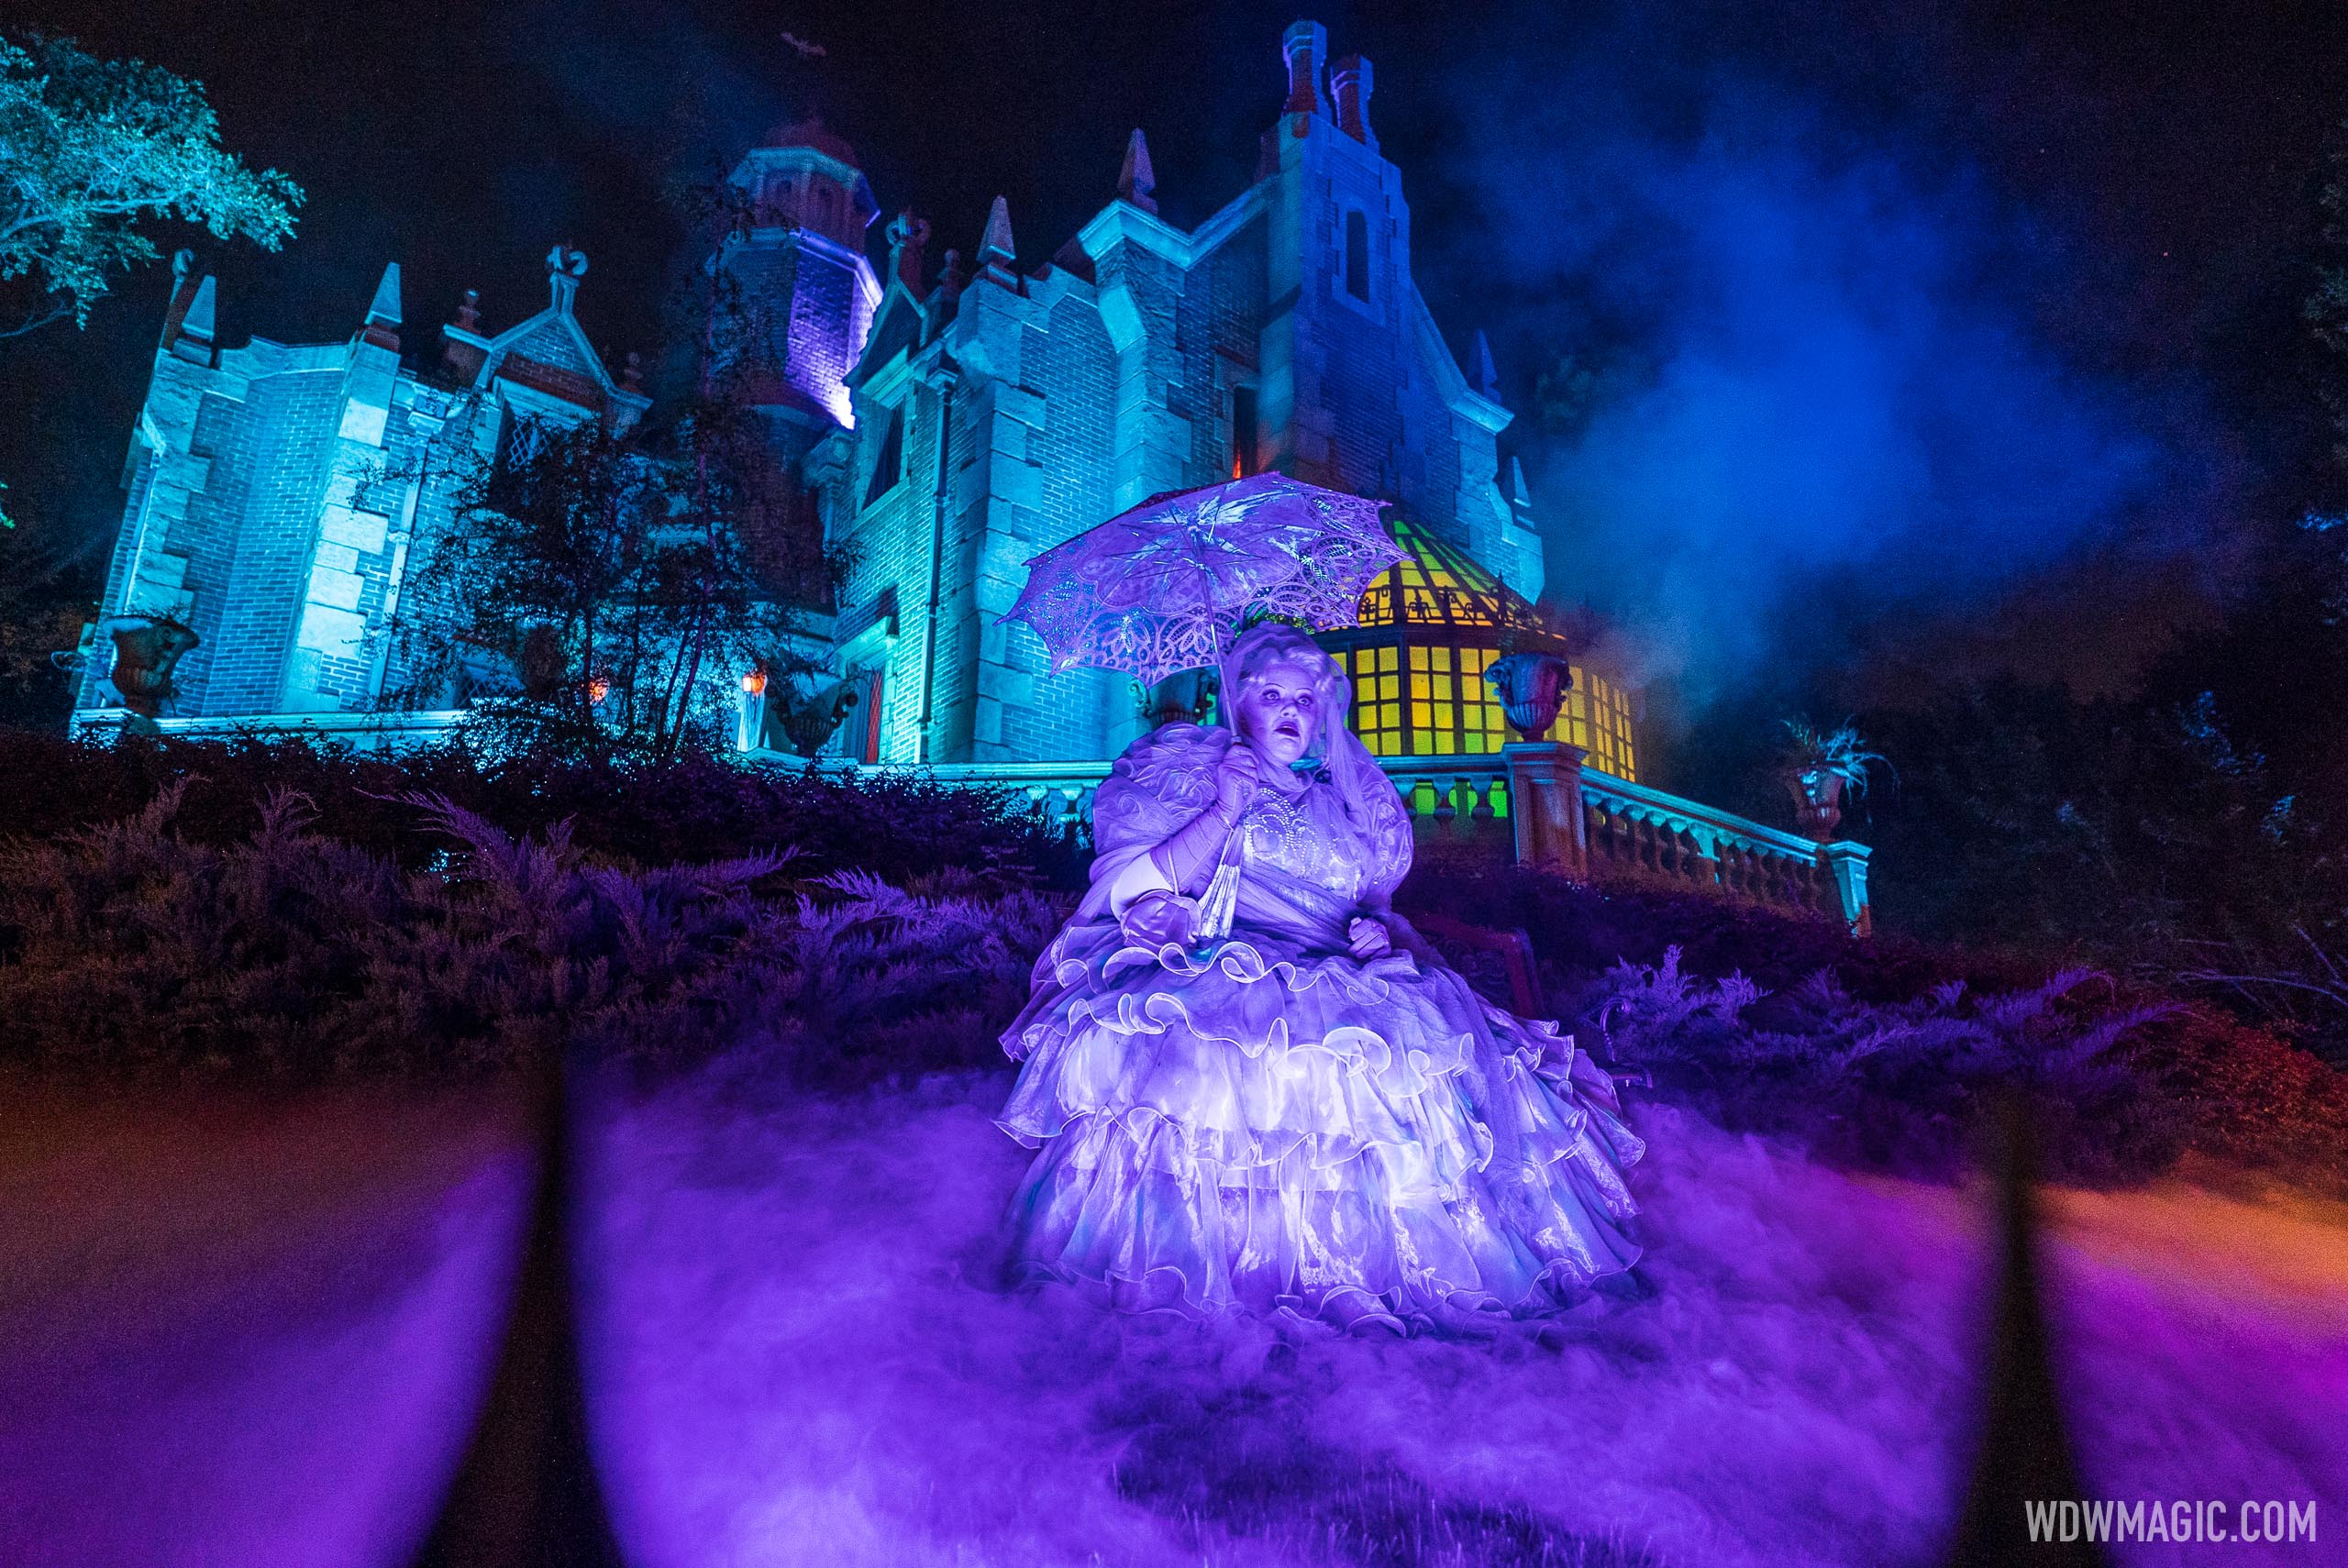 Only two dates remain available for 'Disney After Hours BOO BASH'